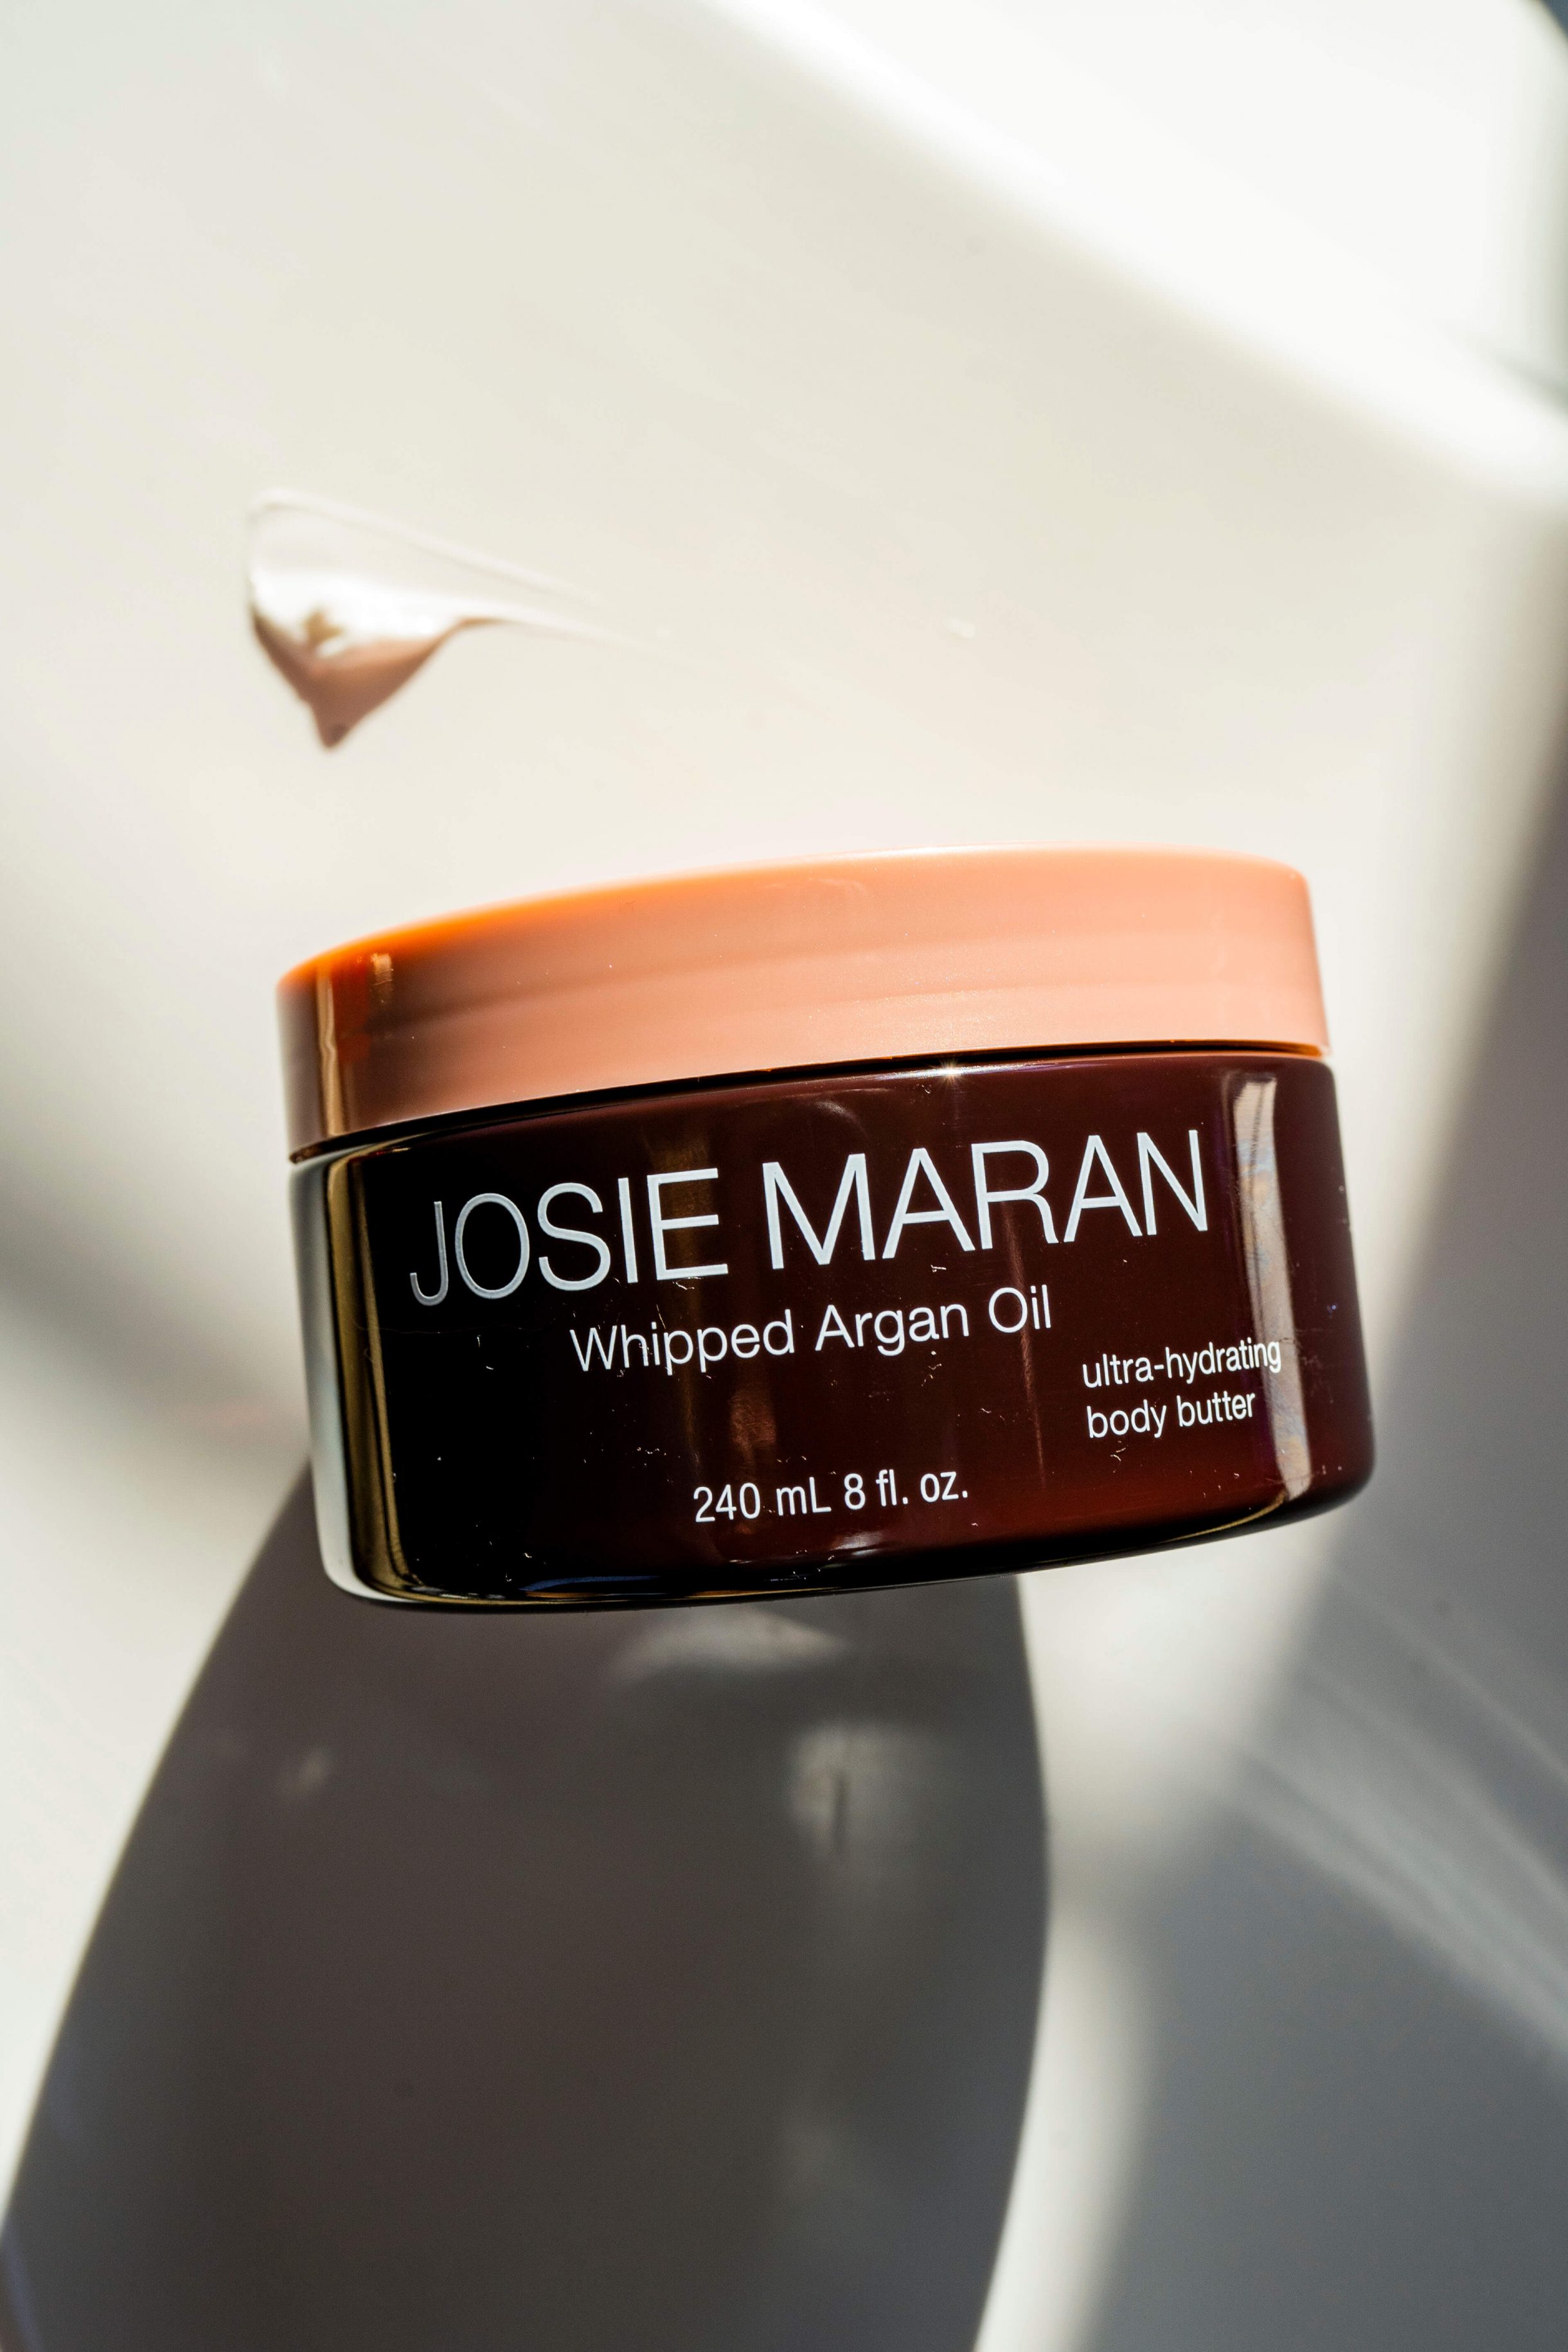 Showing a container of Josie Maran Whipped Argan Oil Body Butter